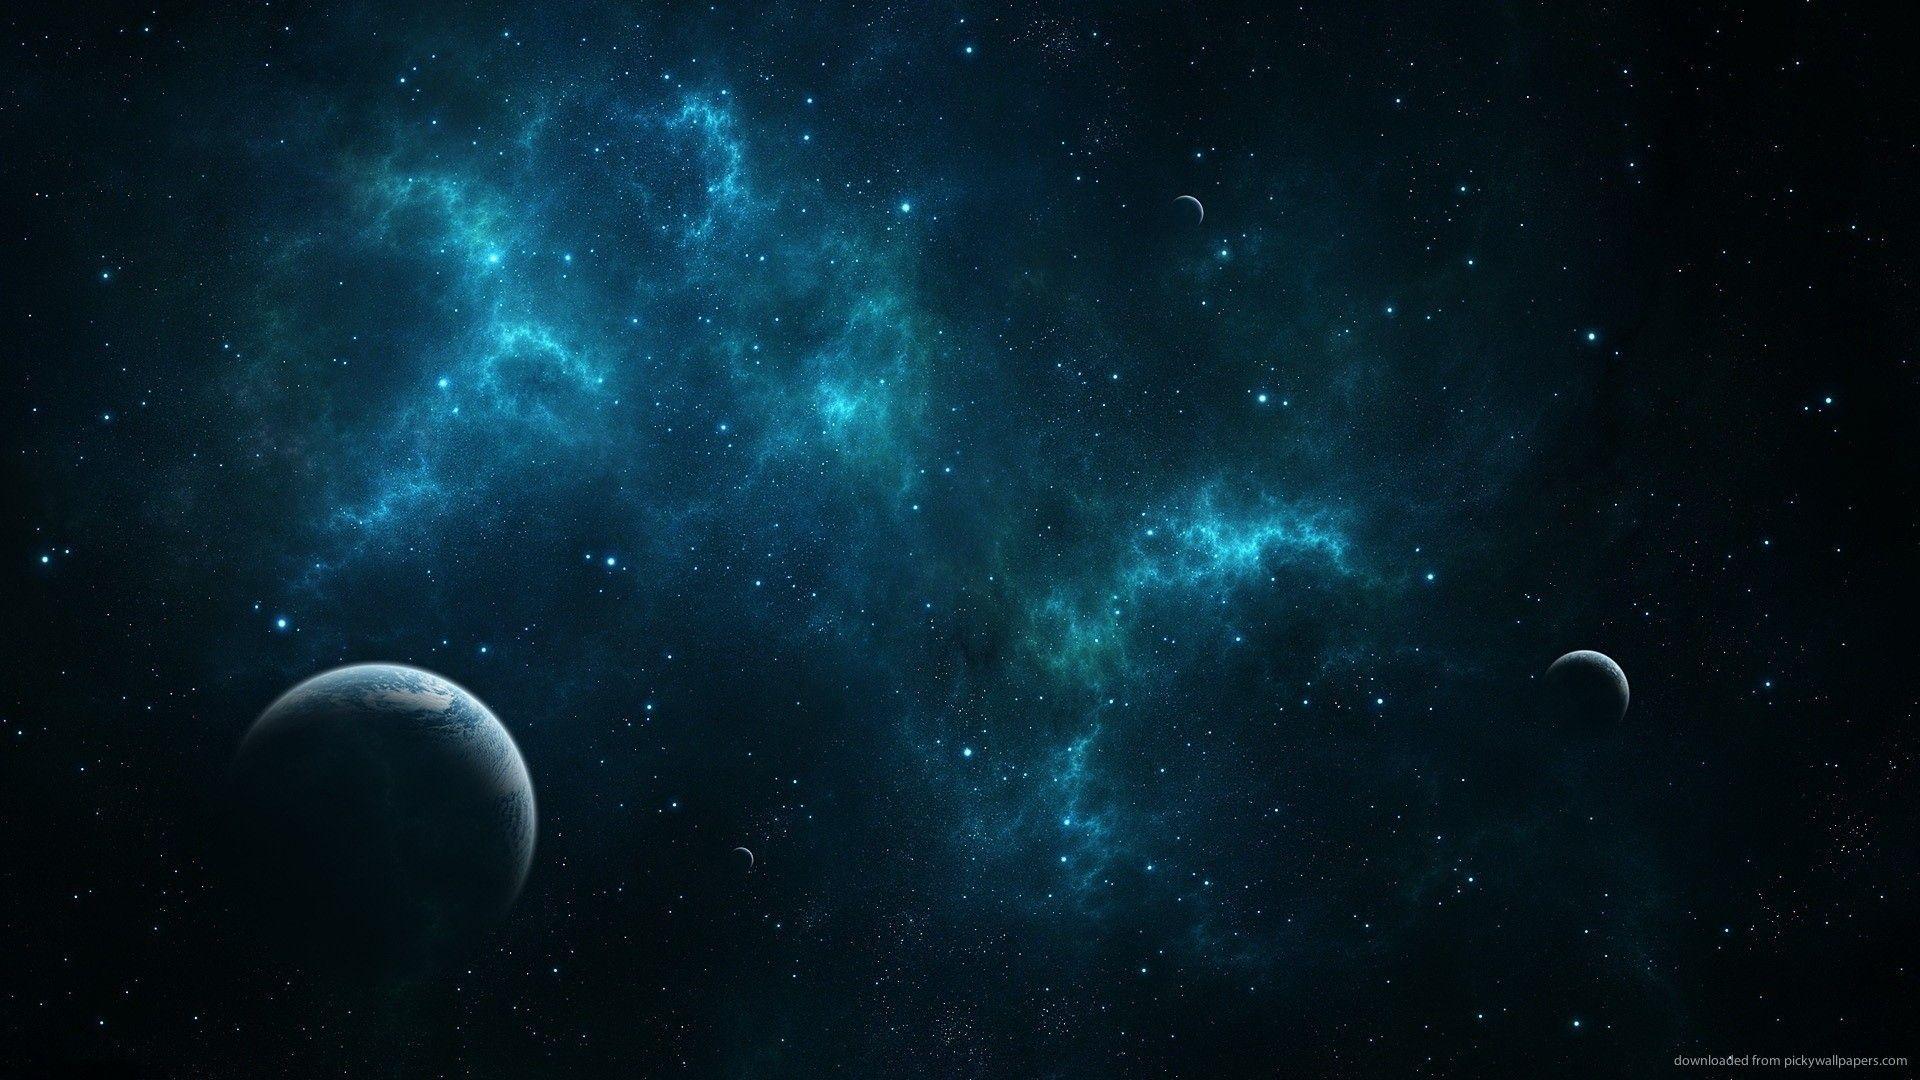 Space wallpapers full hd, hdtv, fhd, 1080p, desktop backgrounds hd,  pictures and images